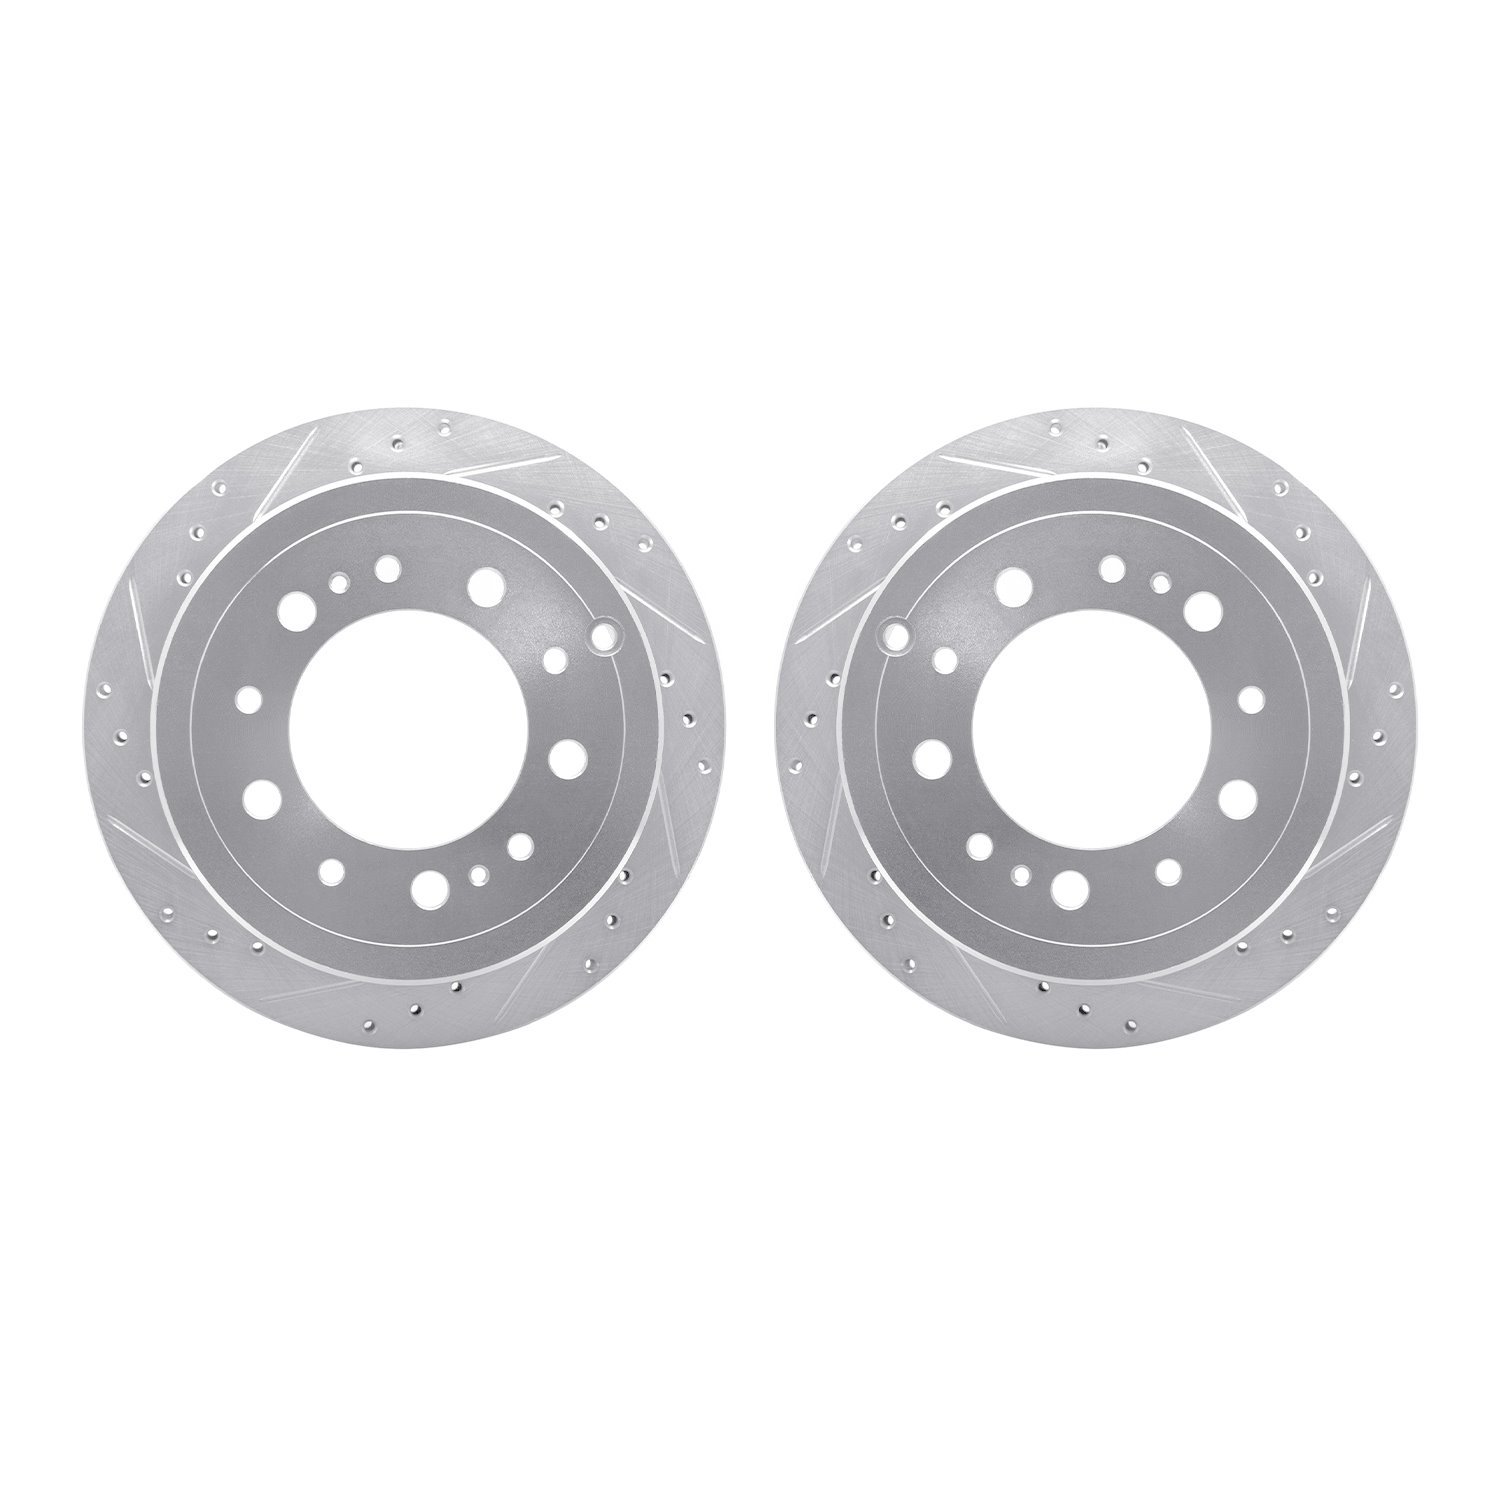 Drilled/Slotted Brake Rotors [Silver], 1998-2007 Lexus/Toyota/Scion